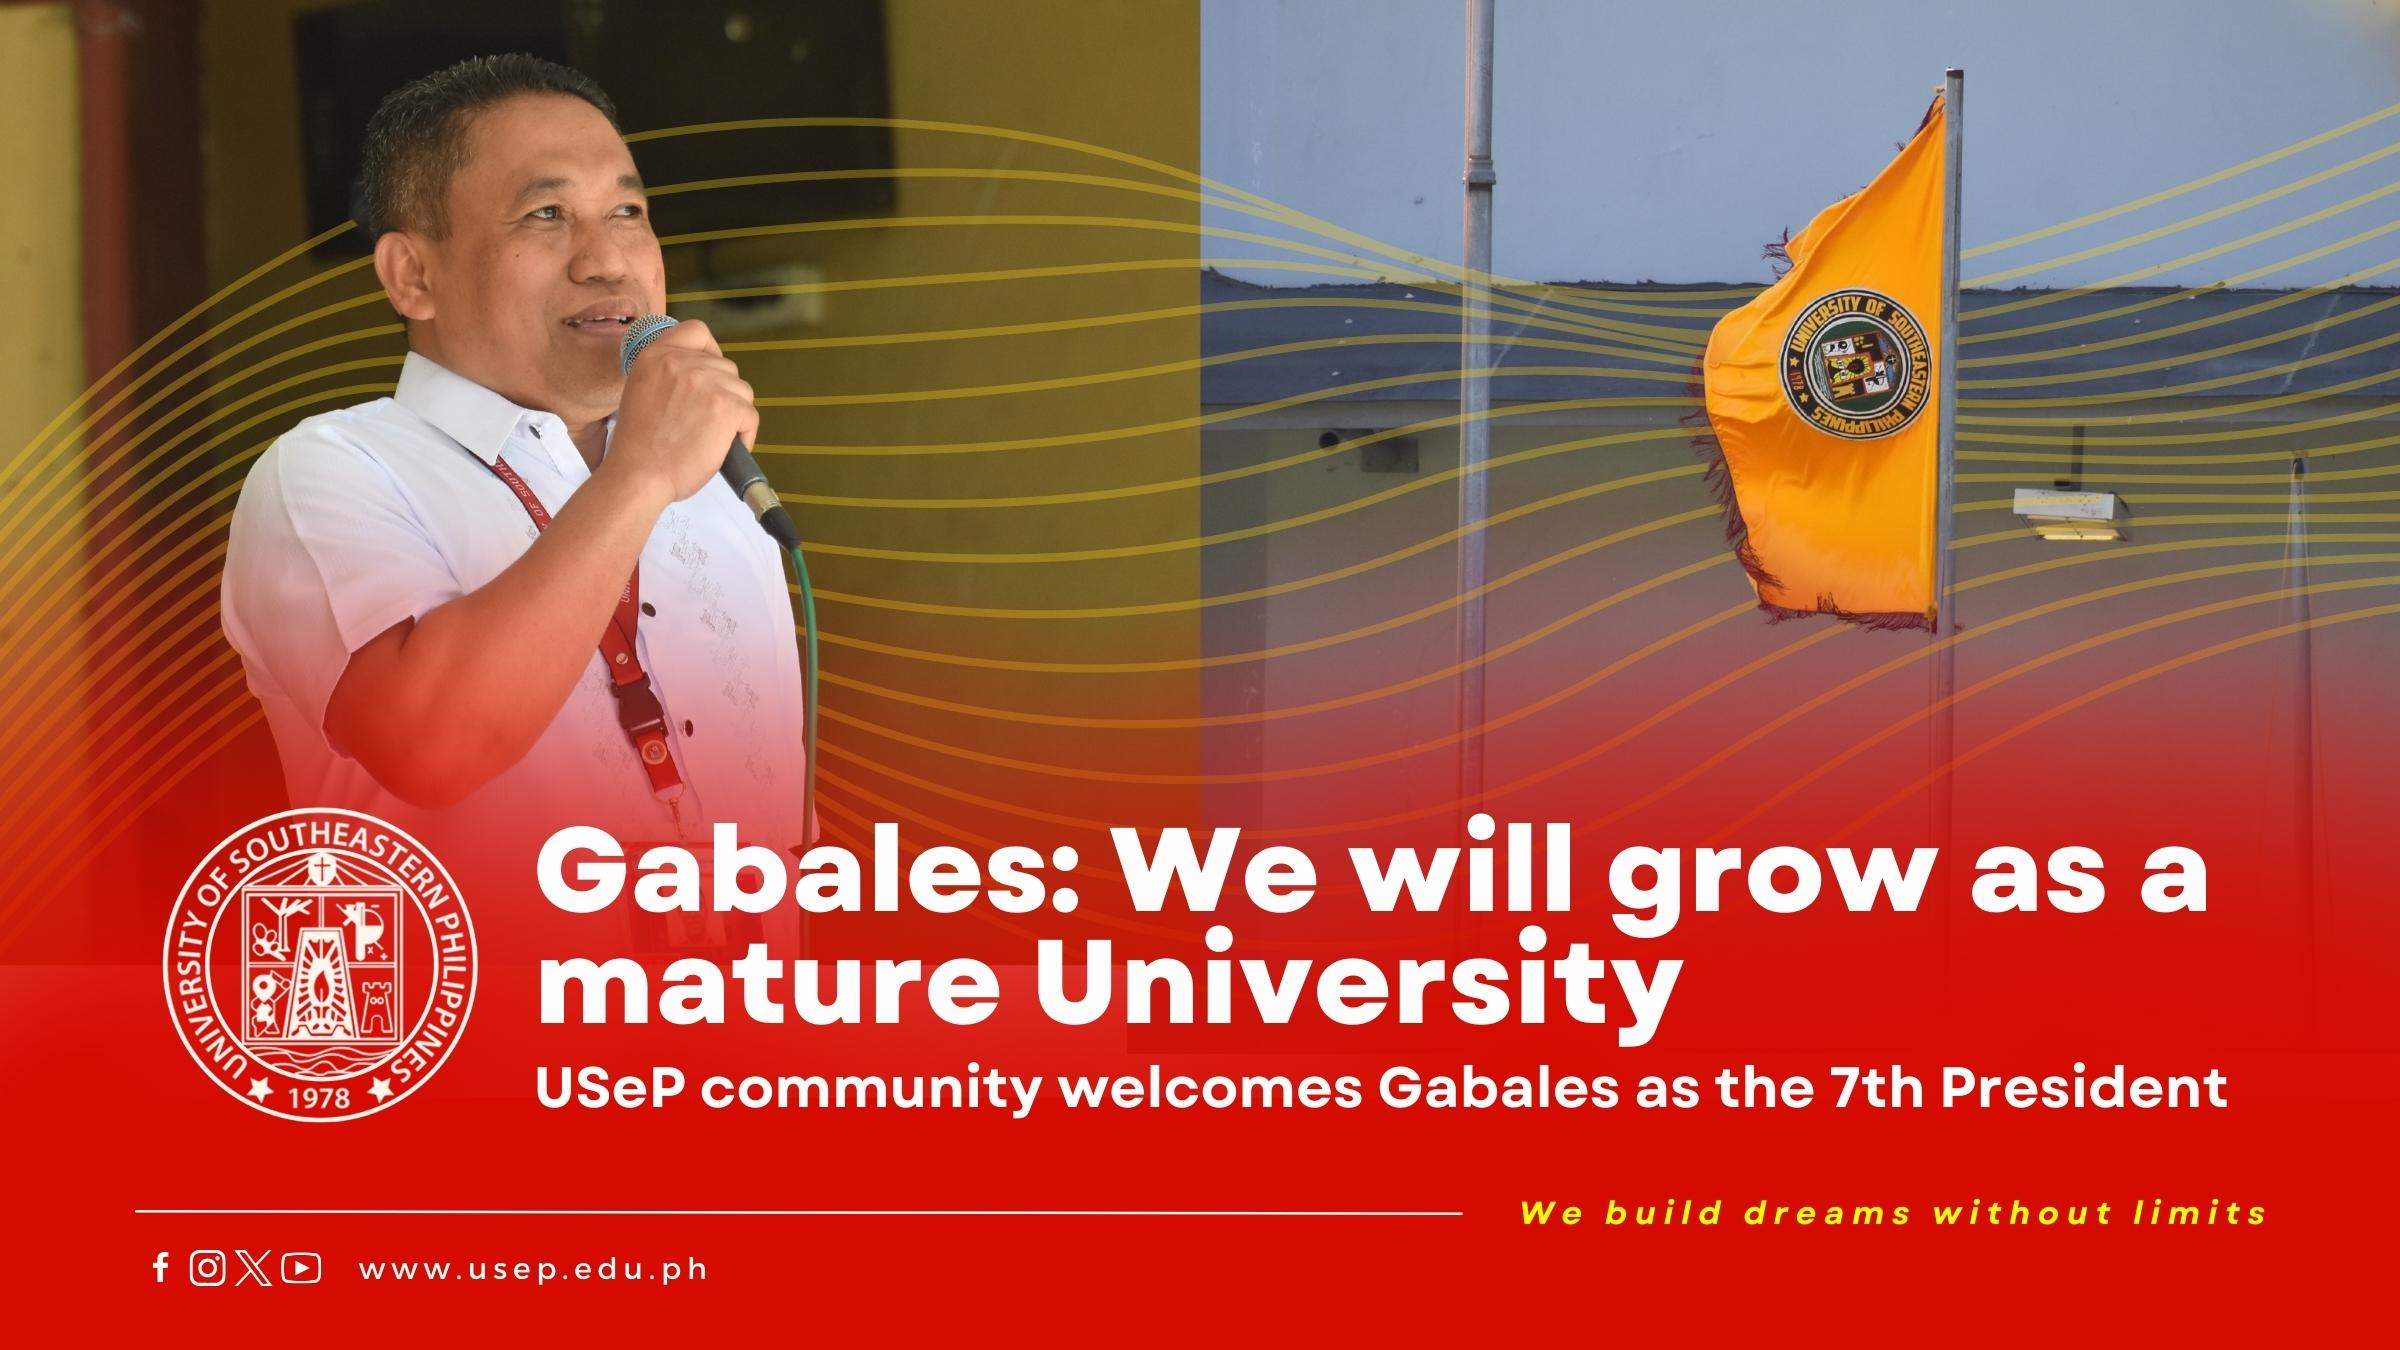 Gabales: We will grow as a mature University; USeP community welcomes Gabales as the 7th President